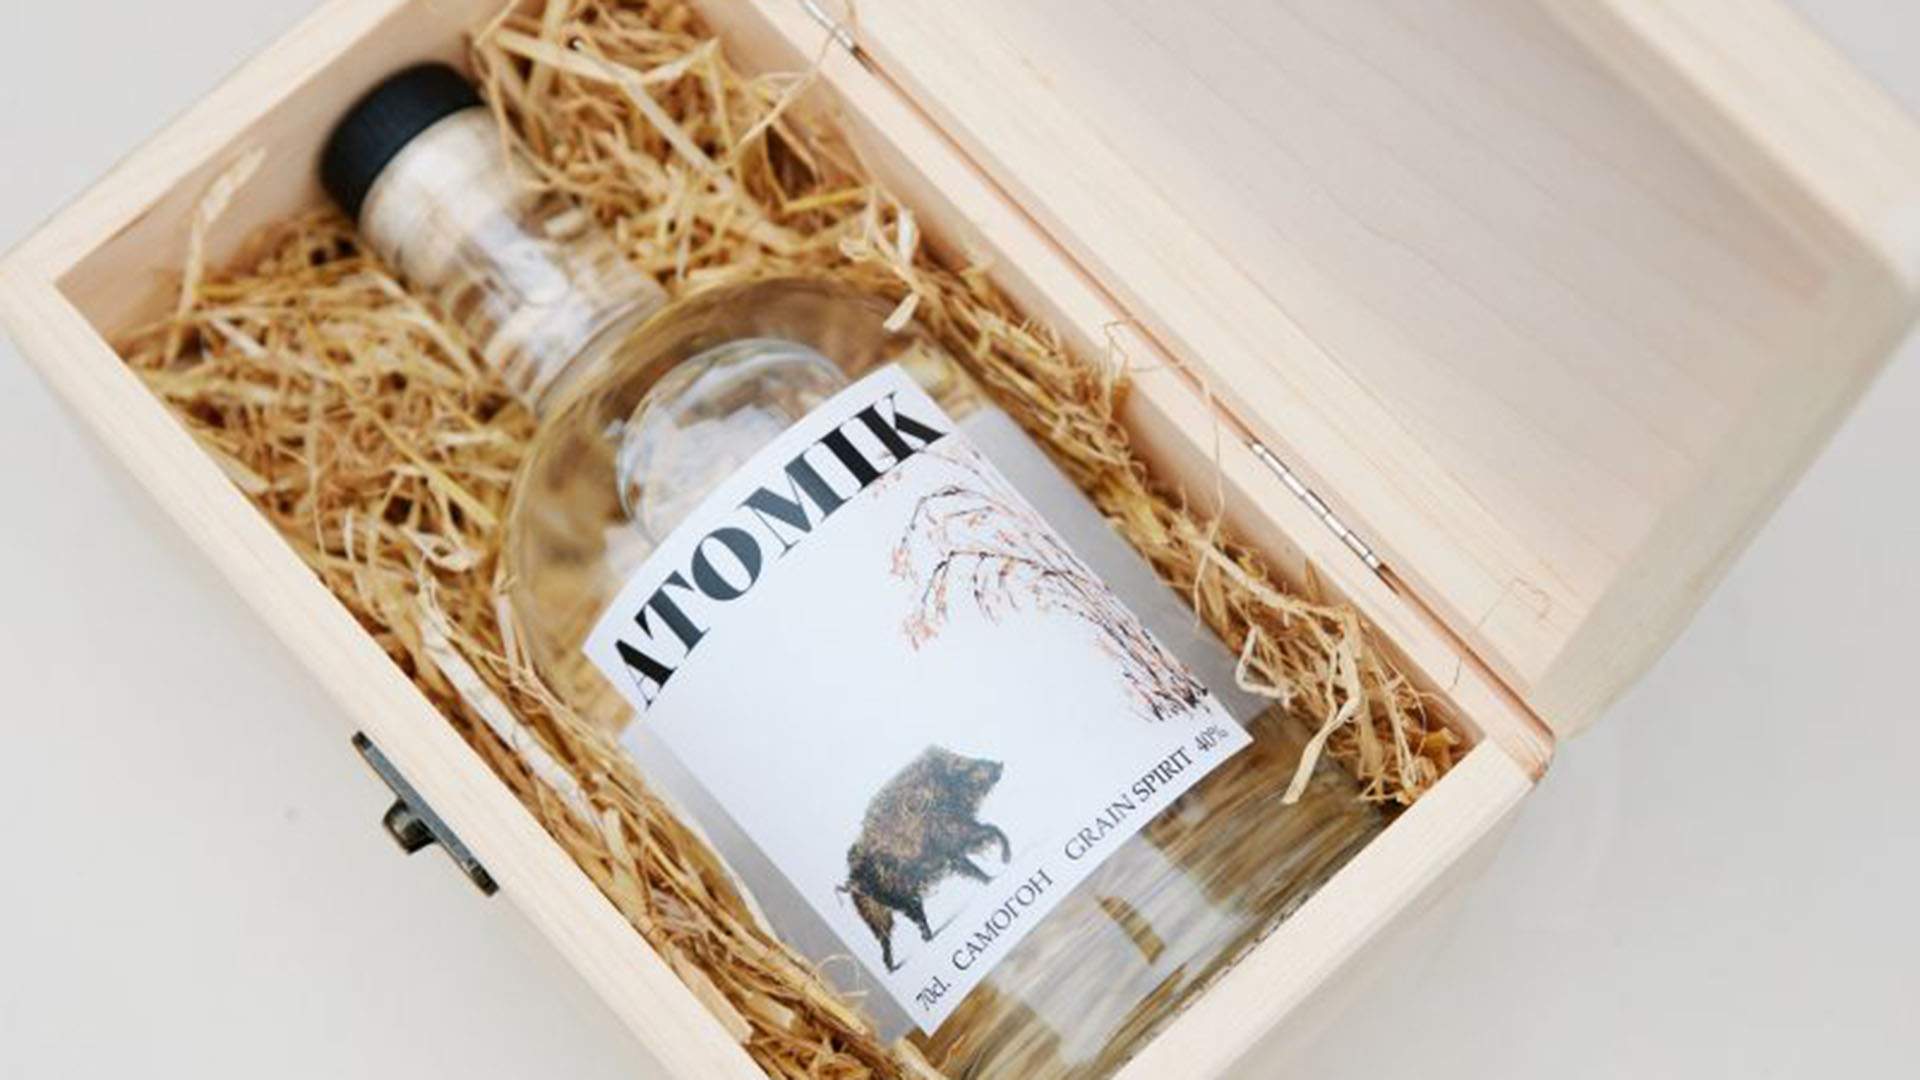 This New Vodka Is Made From Grain From the Chernobyl Exclusion Zone